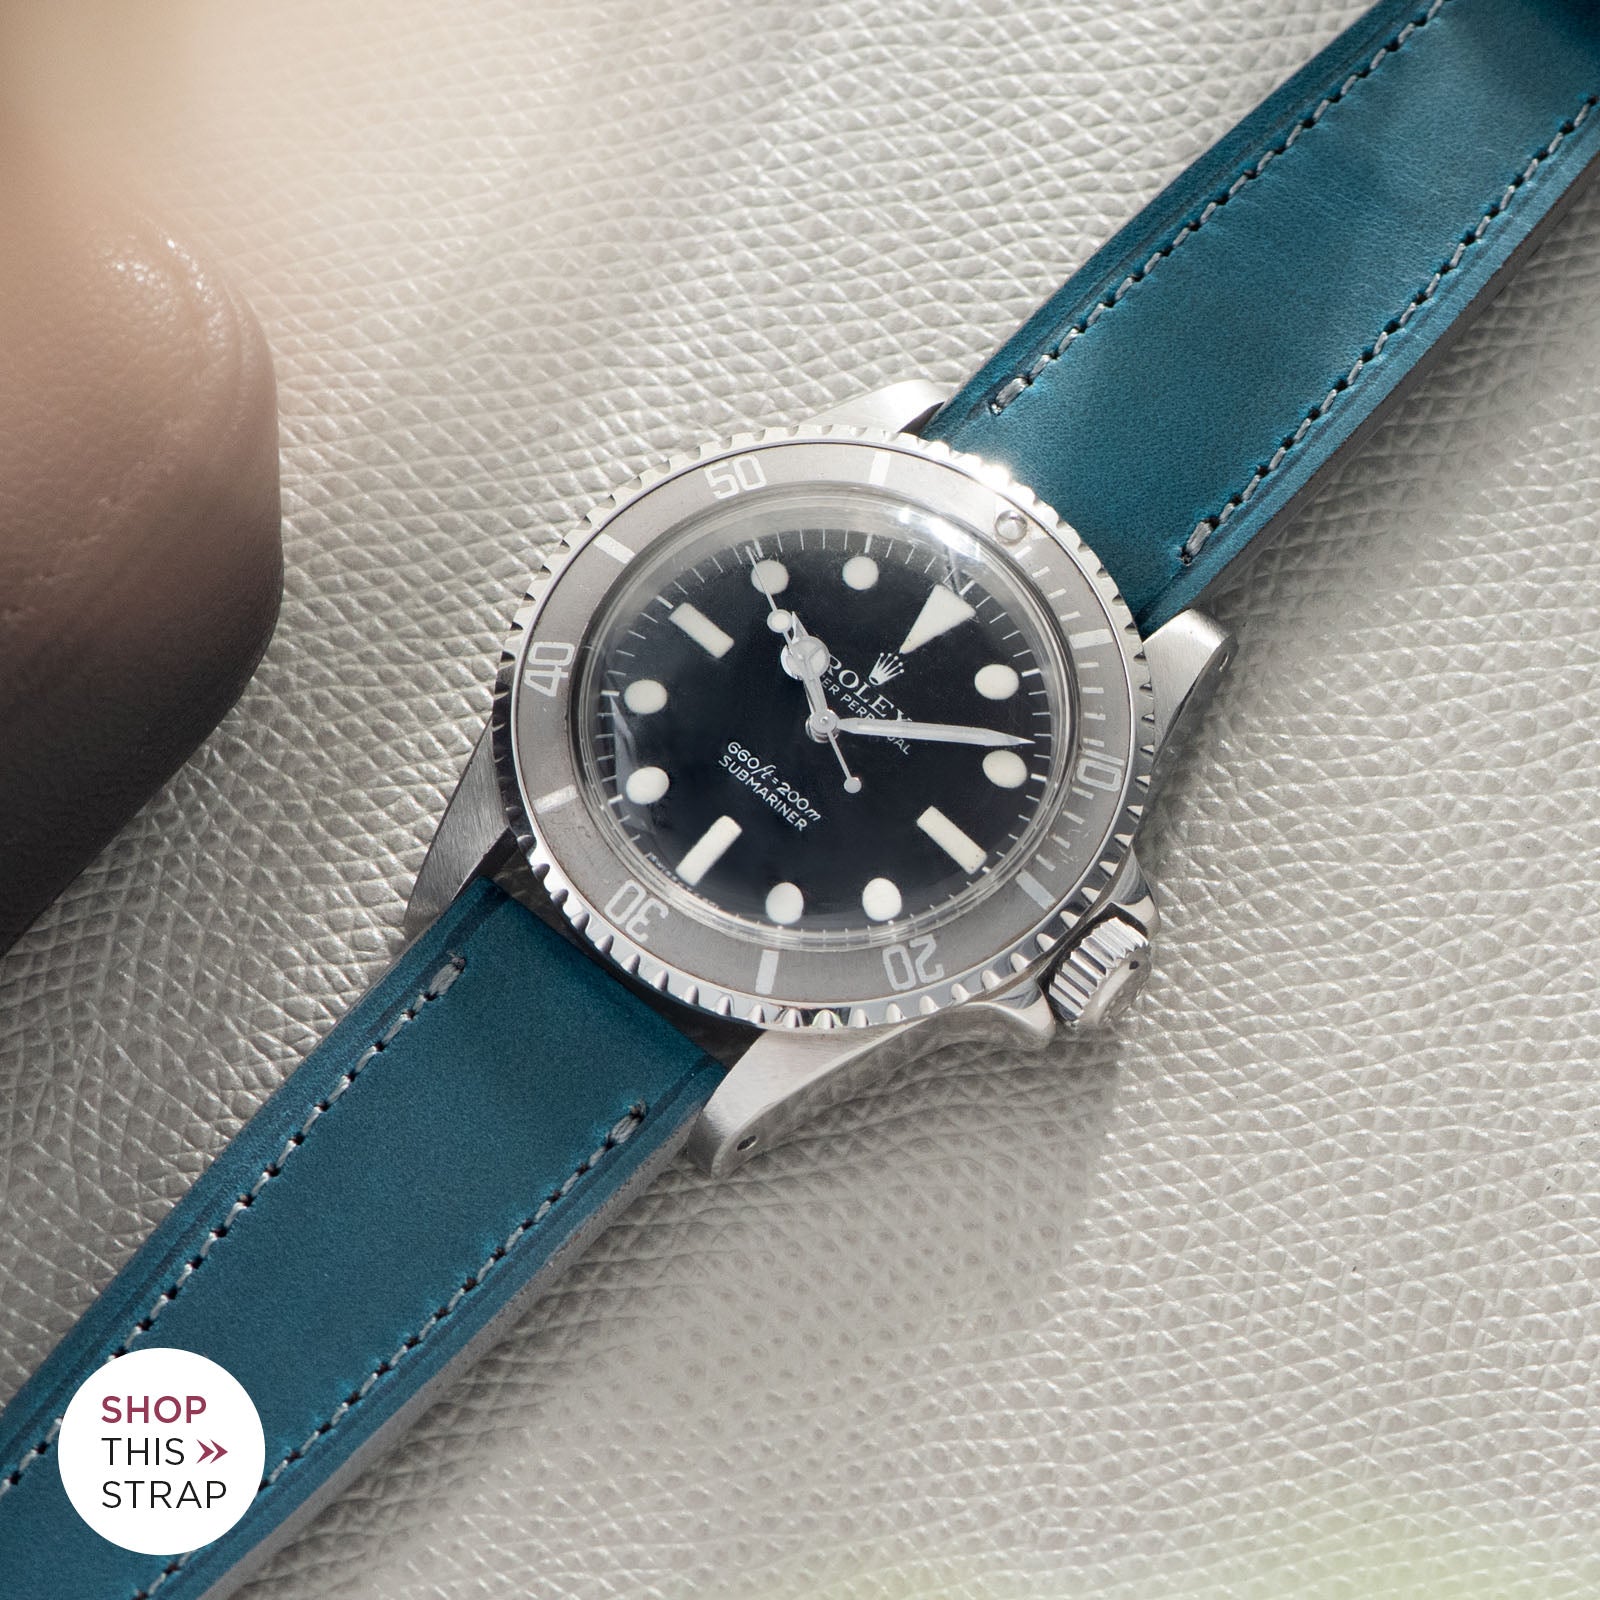 Bulang and Sons_Strap Guide_The Rolex 5513 Faded Maxi Submariner_Château de Cassis Blue Horwneen Leather Watch Strap